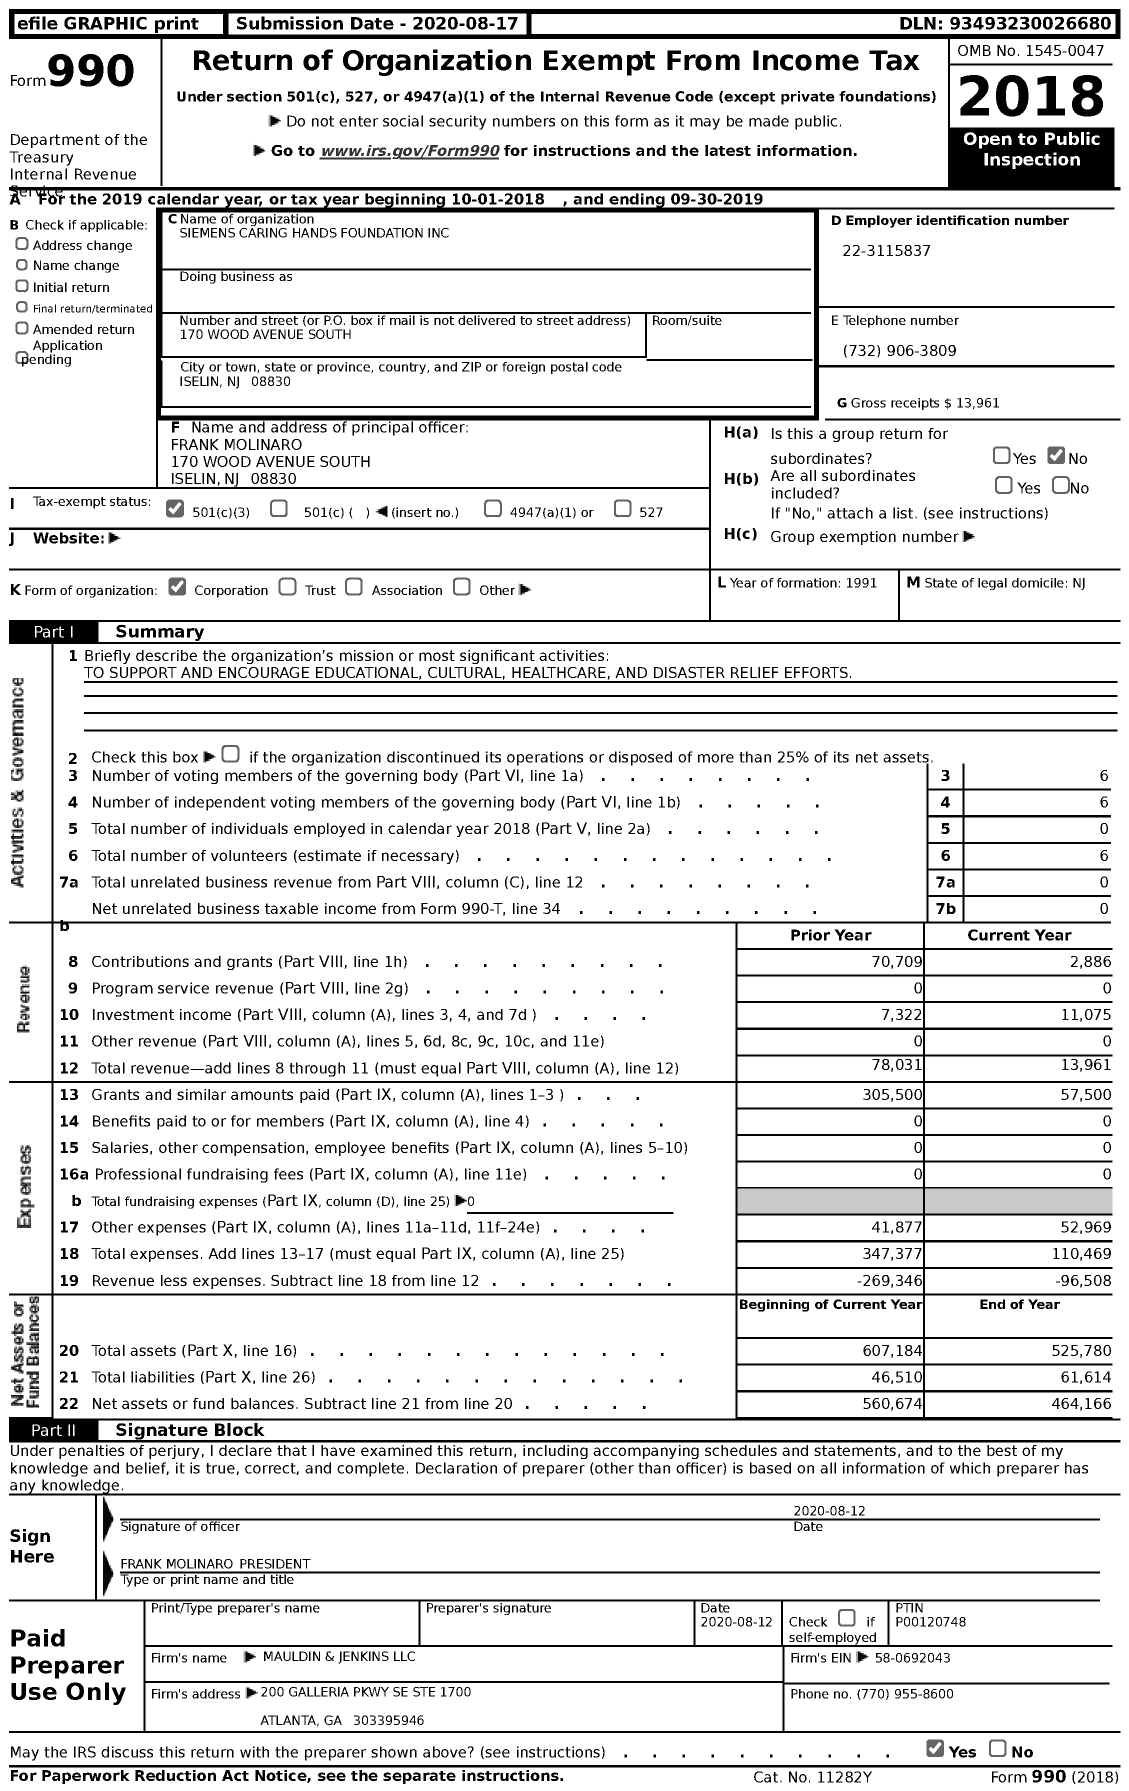 Image of first page of 2018 Form 990 for Siemens Caring Hands Foundation